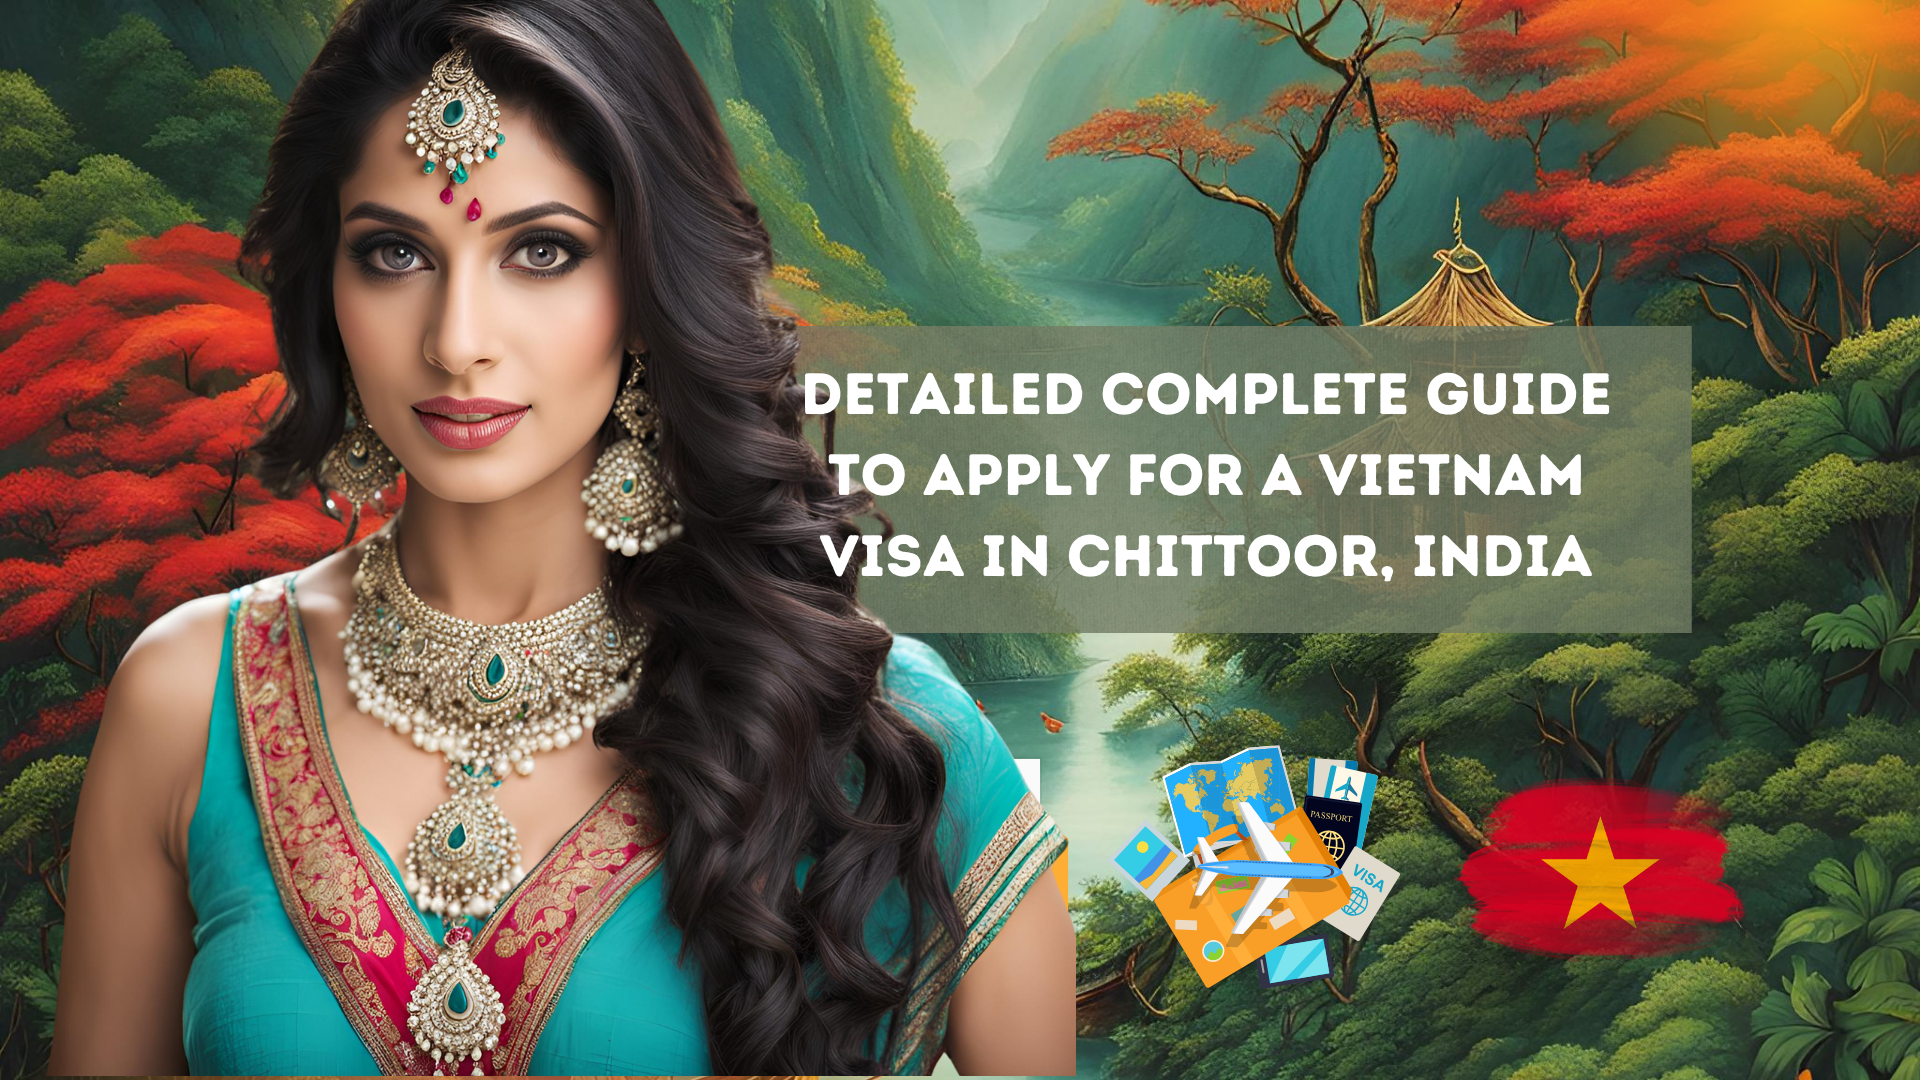 Detailed Complete Guide to Apply for a Vietnam Visa in Chittoor, India